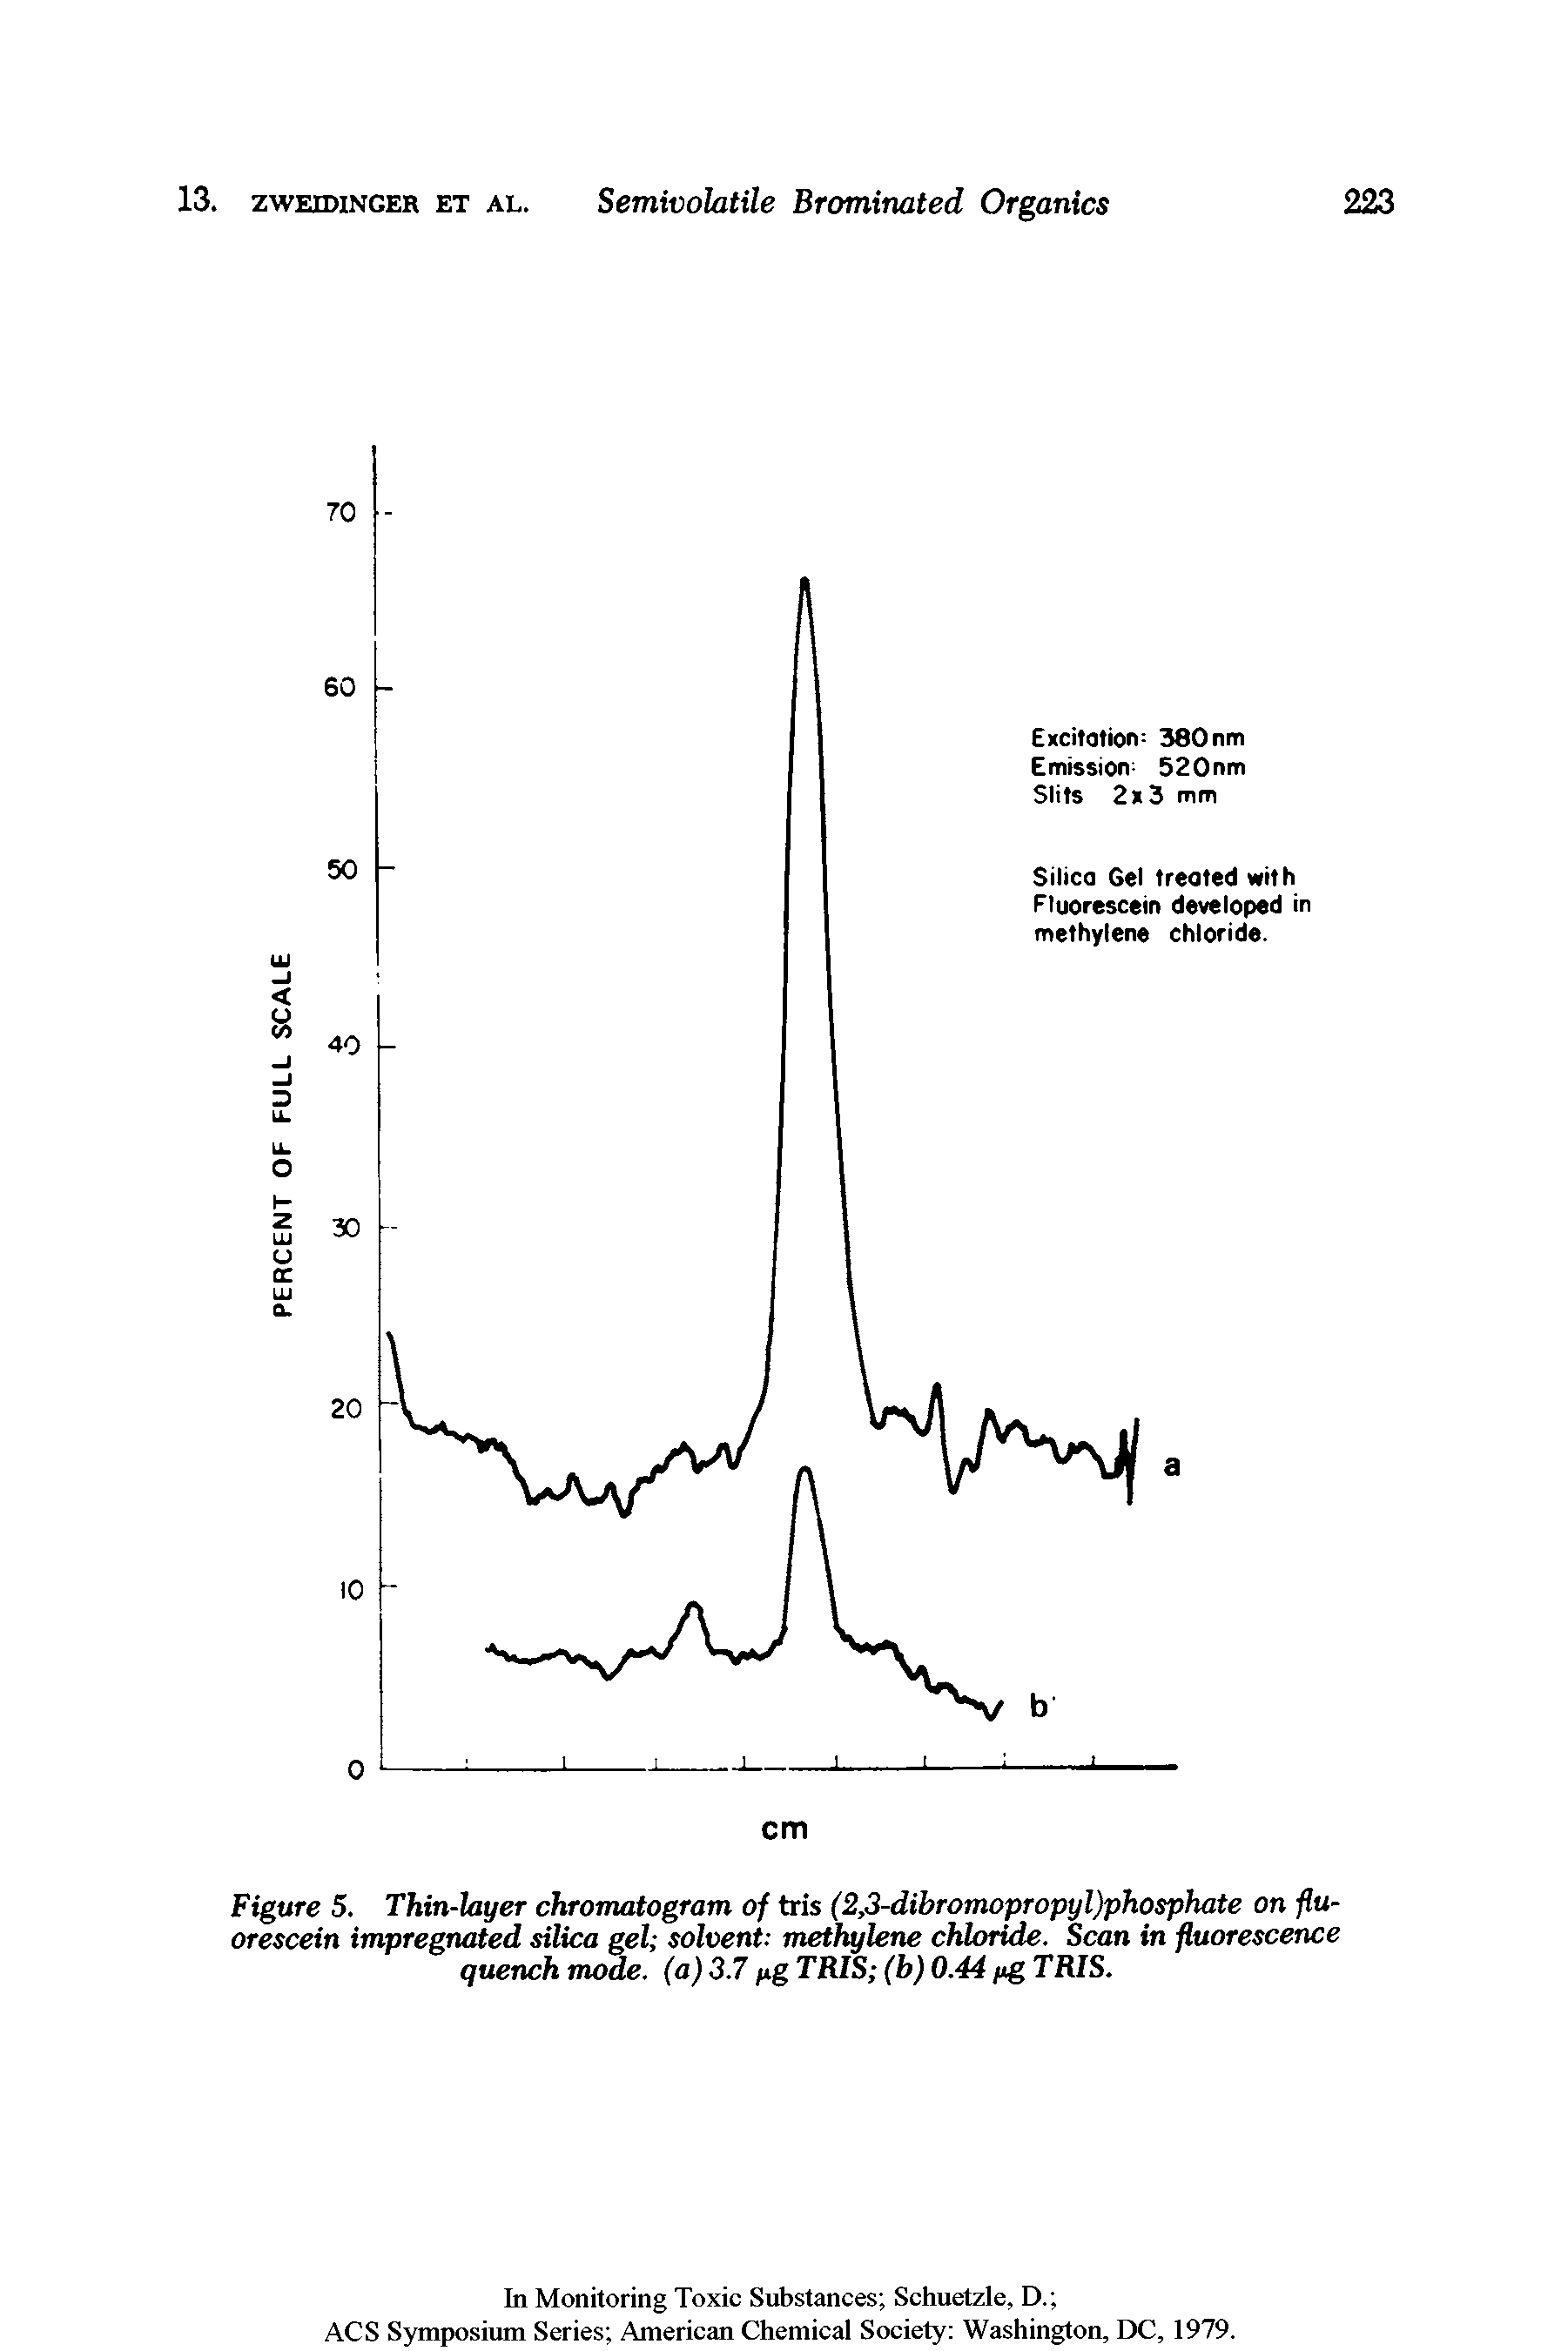 Figure 5. Thin-layer chromatogram of tris (2,3-dibromopropyl)phosphate on fluorescein impregnated silica gel solvent methylene chloride. Scan in fluorescence quench mom. (a) 3.7 /ig TRIS (b) 0.44 ttg TRIS.